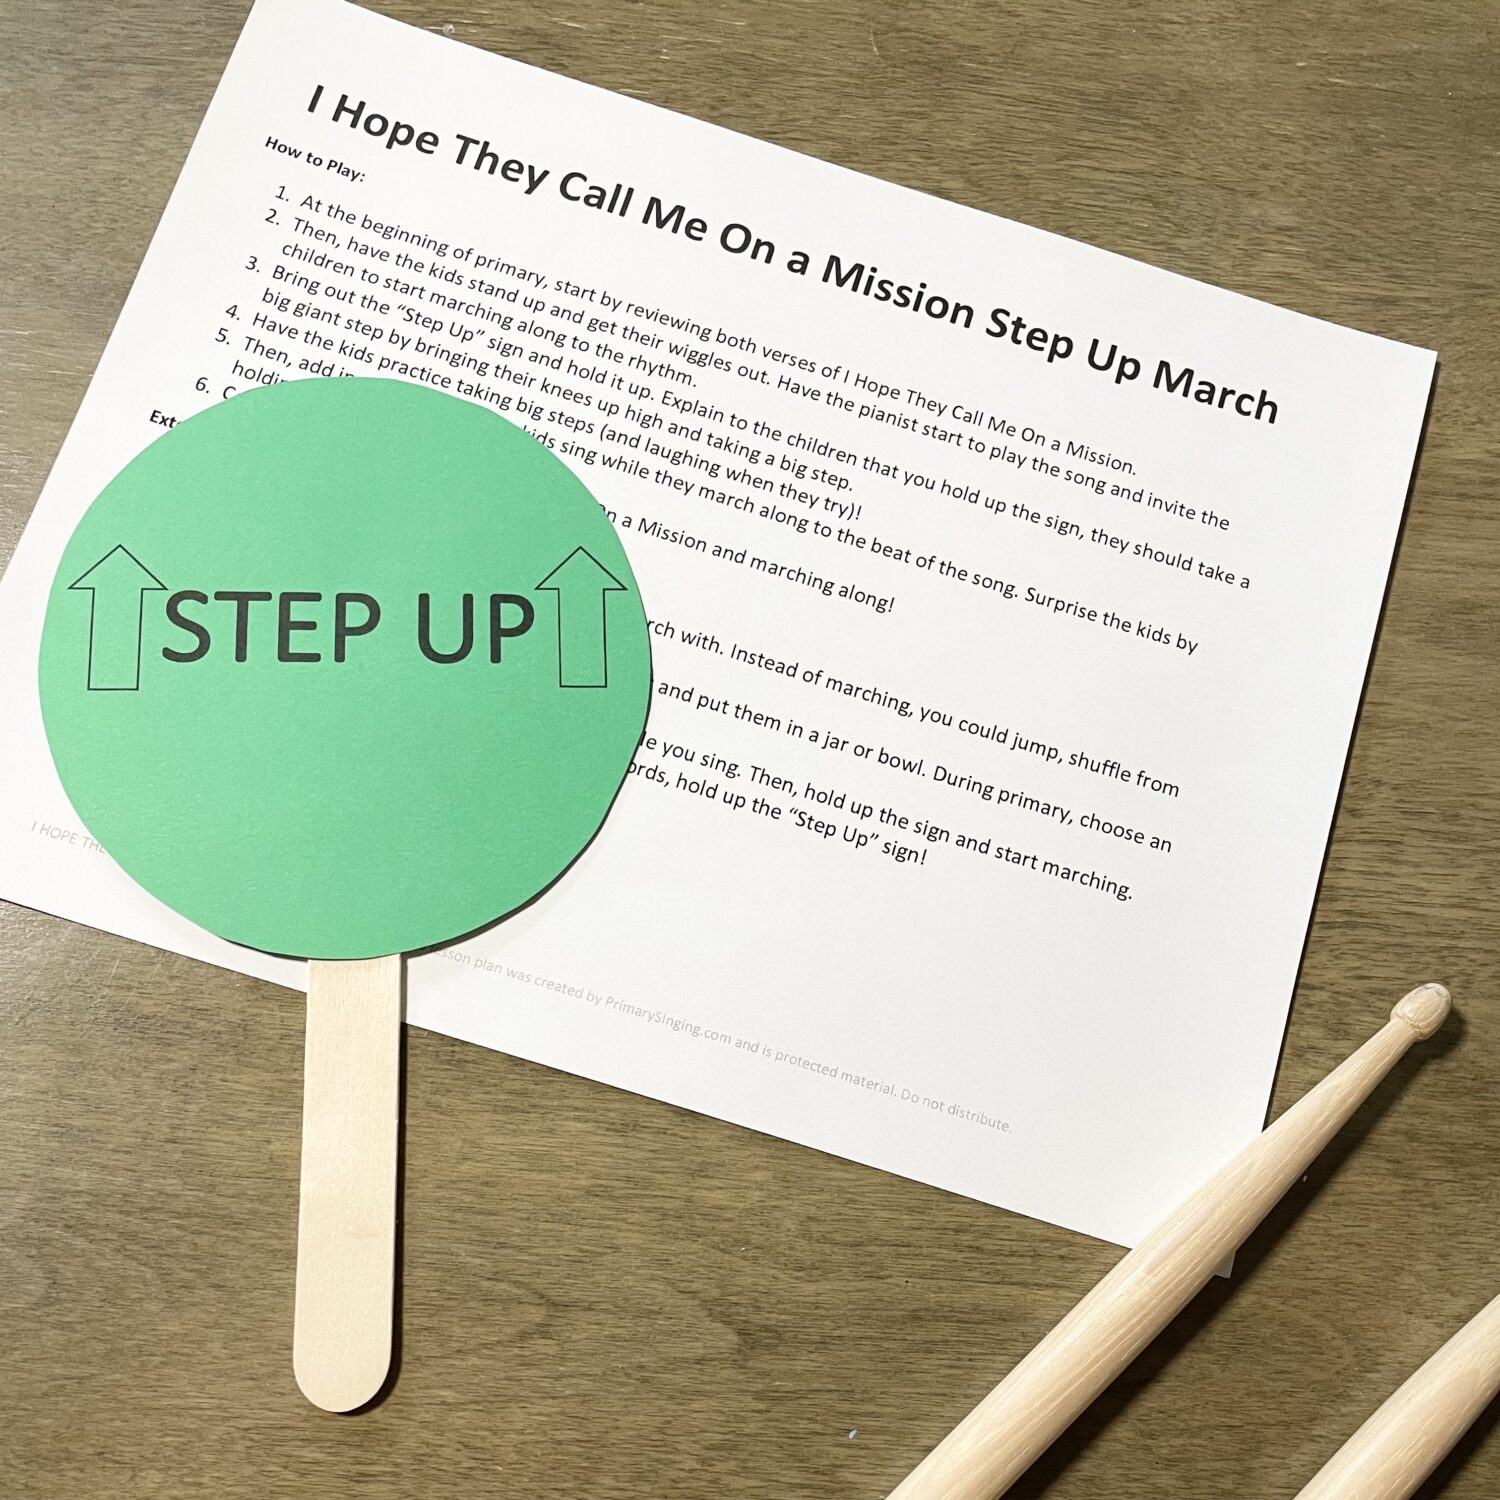 I Hope They Call Me on a Mission Step Up March singing time idea for LDS Primary music leaders - a fun movement activity and way to teach this song!